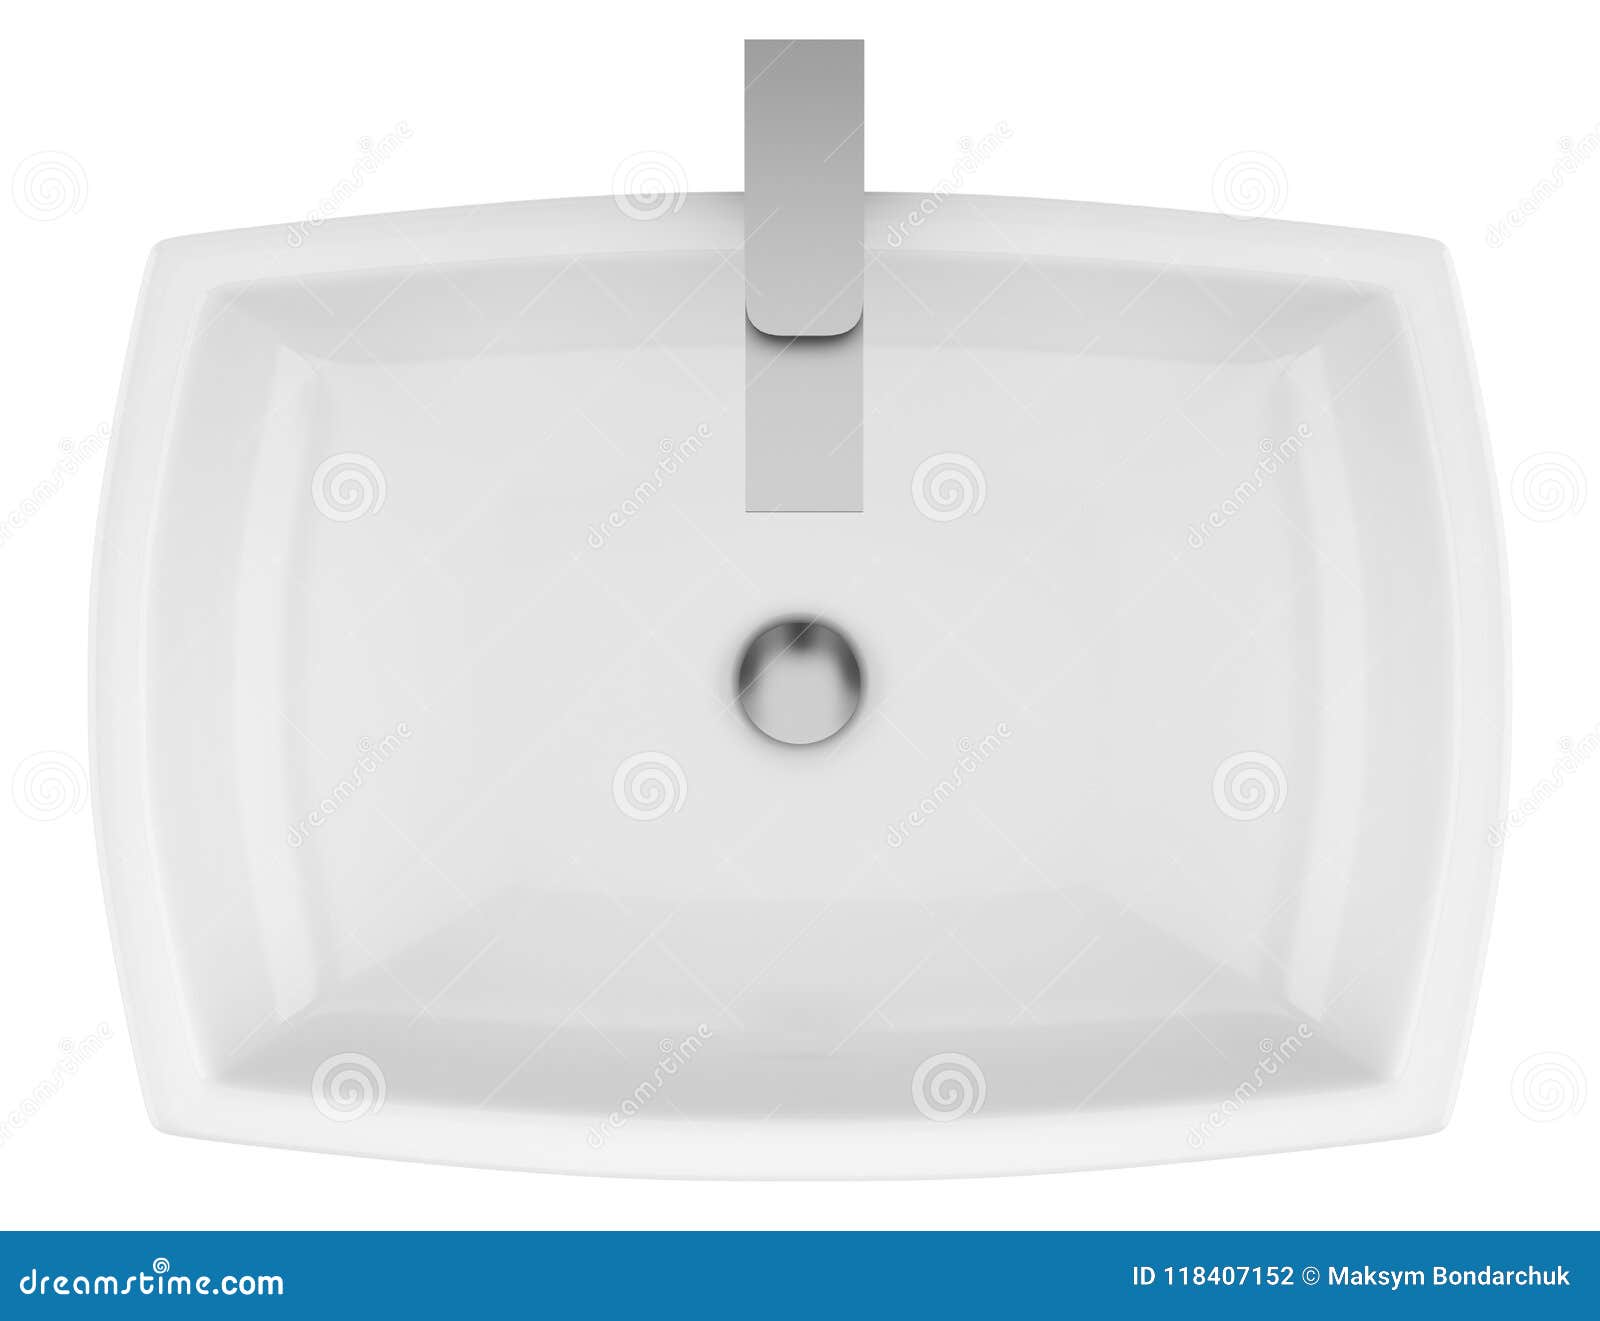 Top View of Ceramic Bathroom Sink Isolated on White Stock Illustration